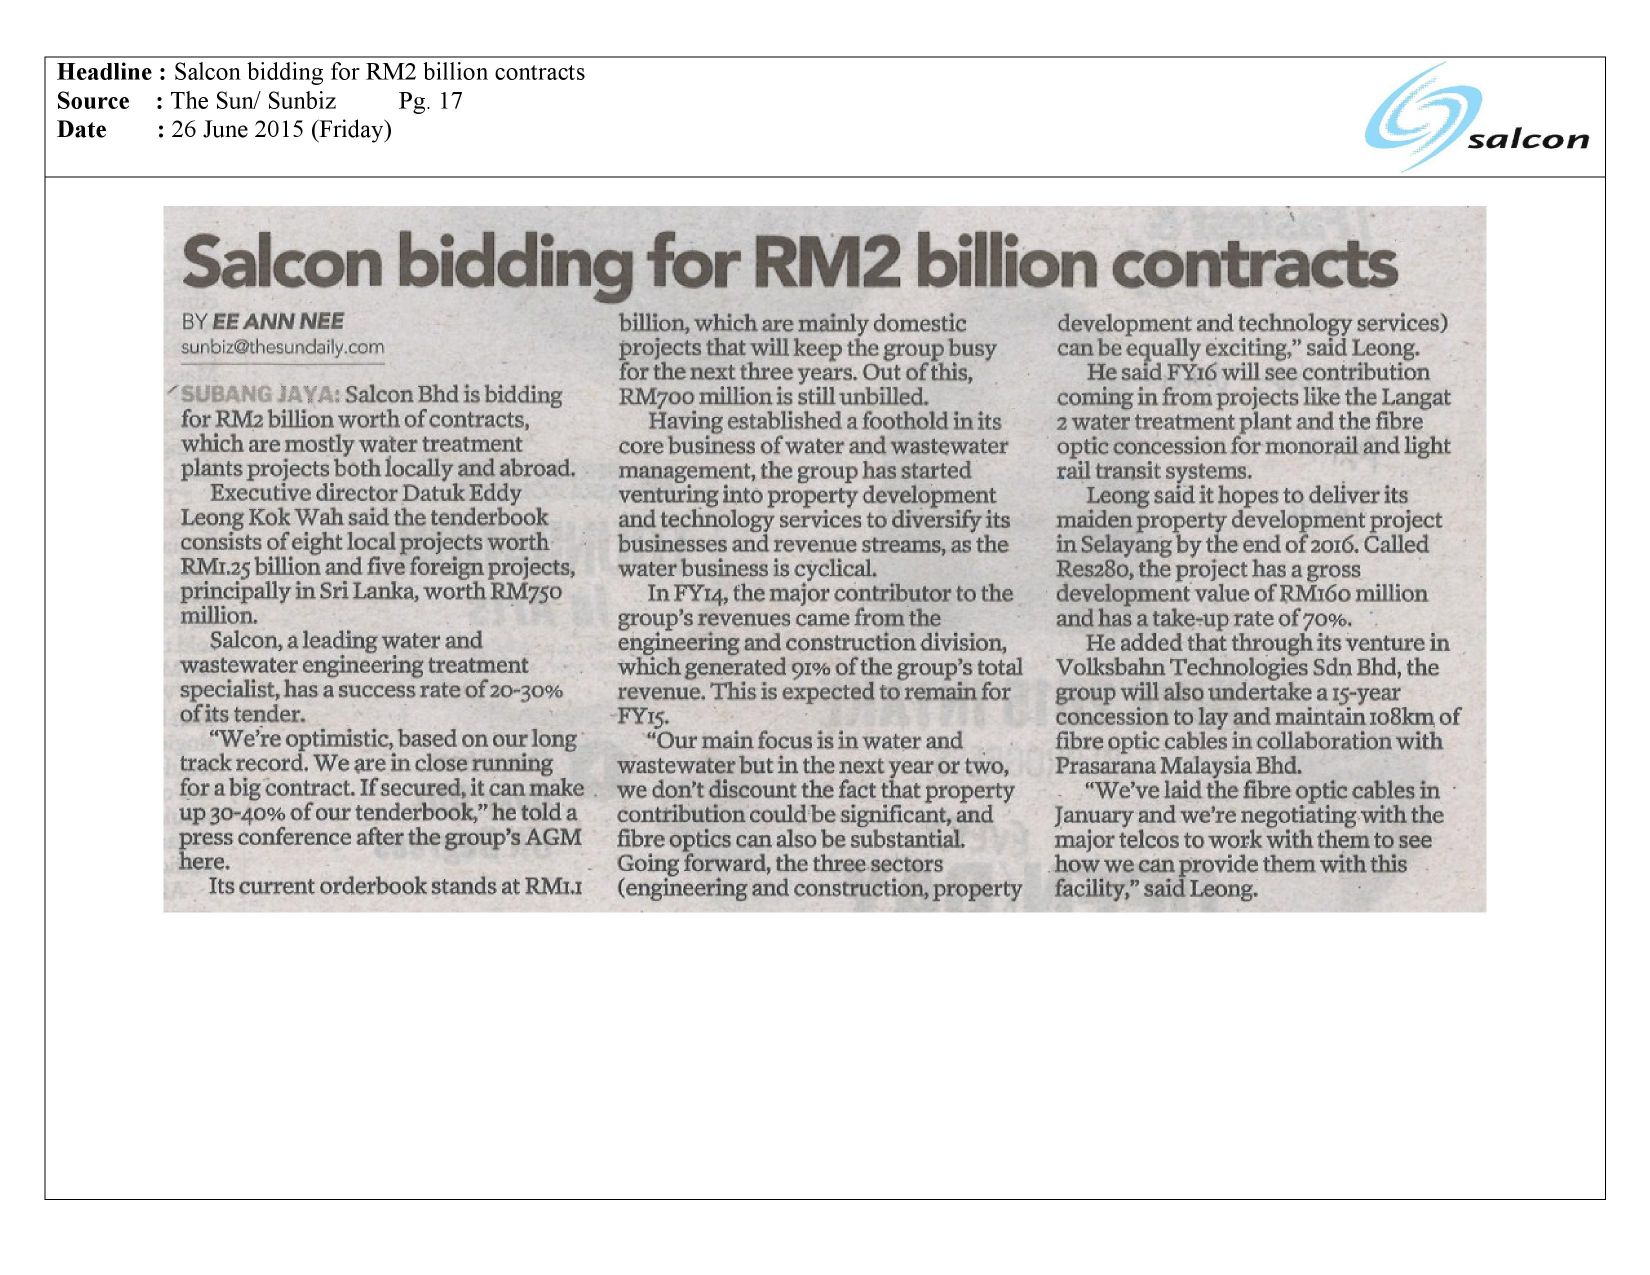 Salcon bidding for RM2 billion contracts